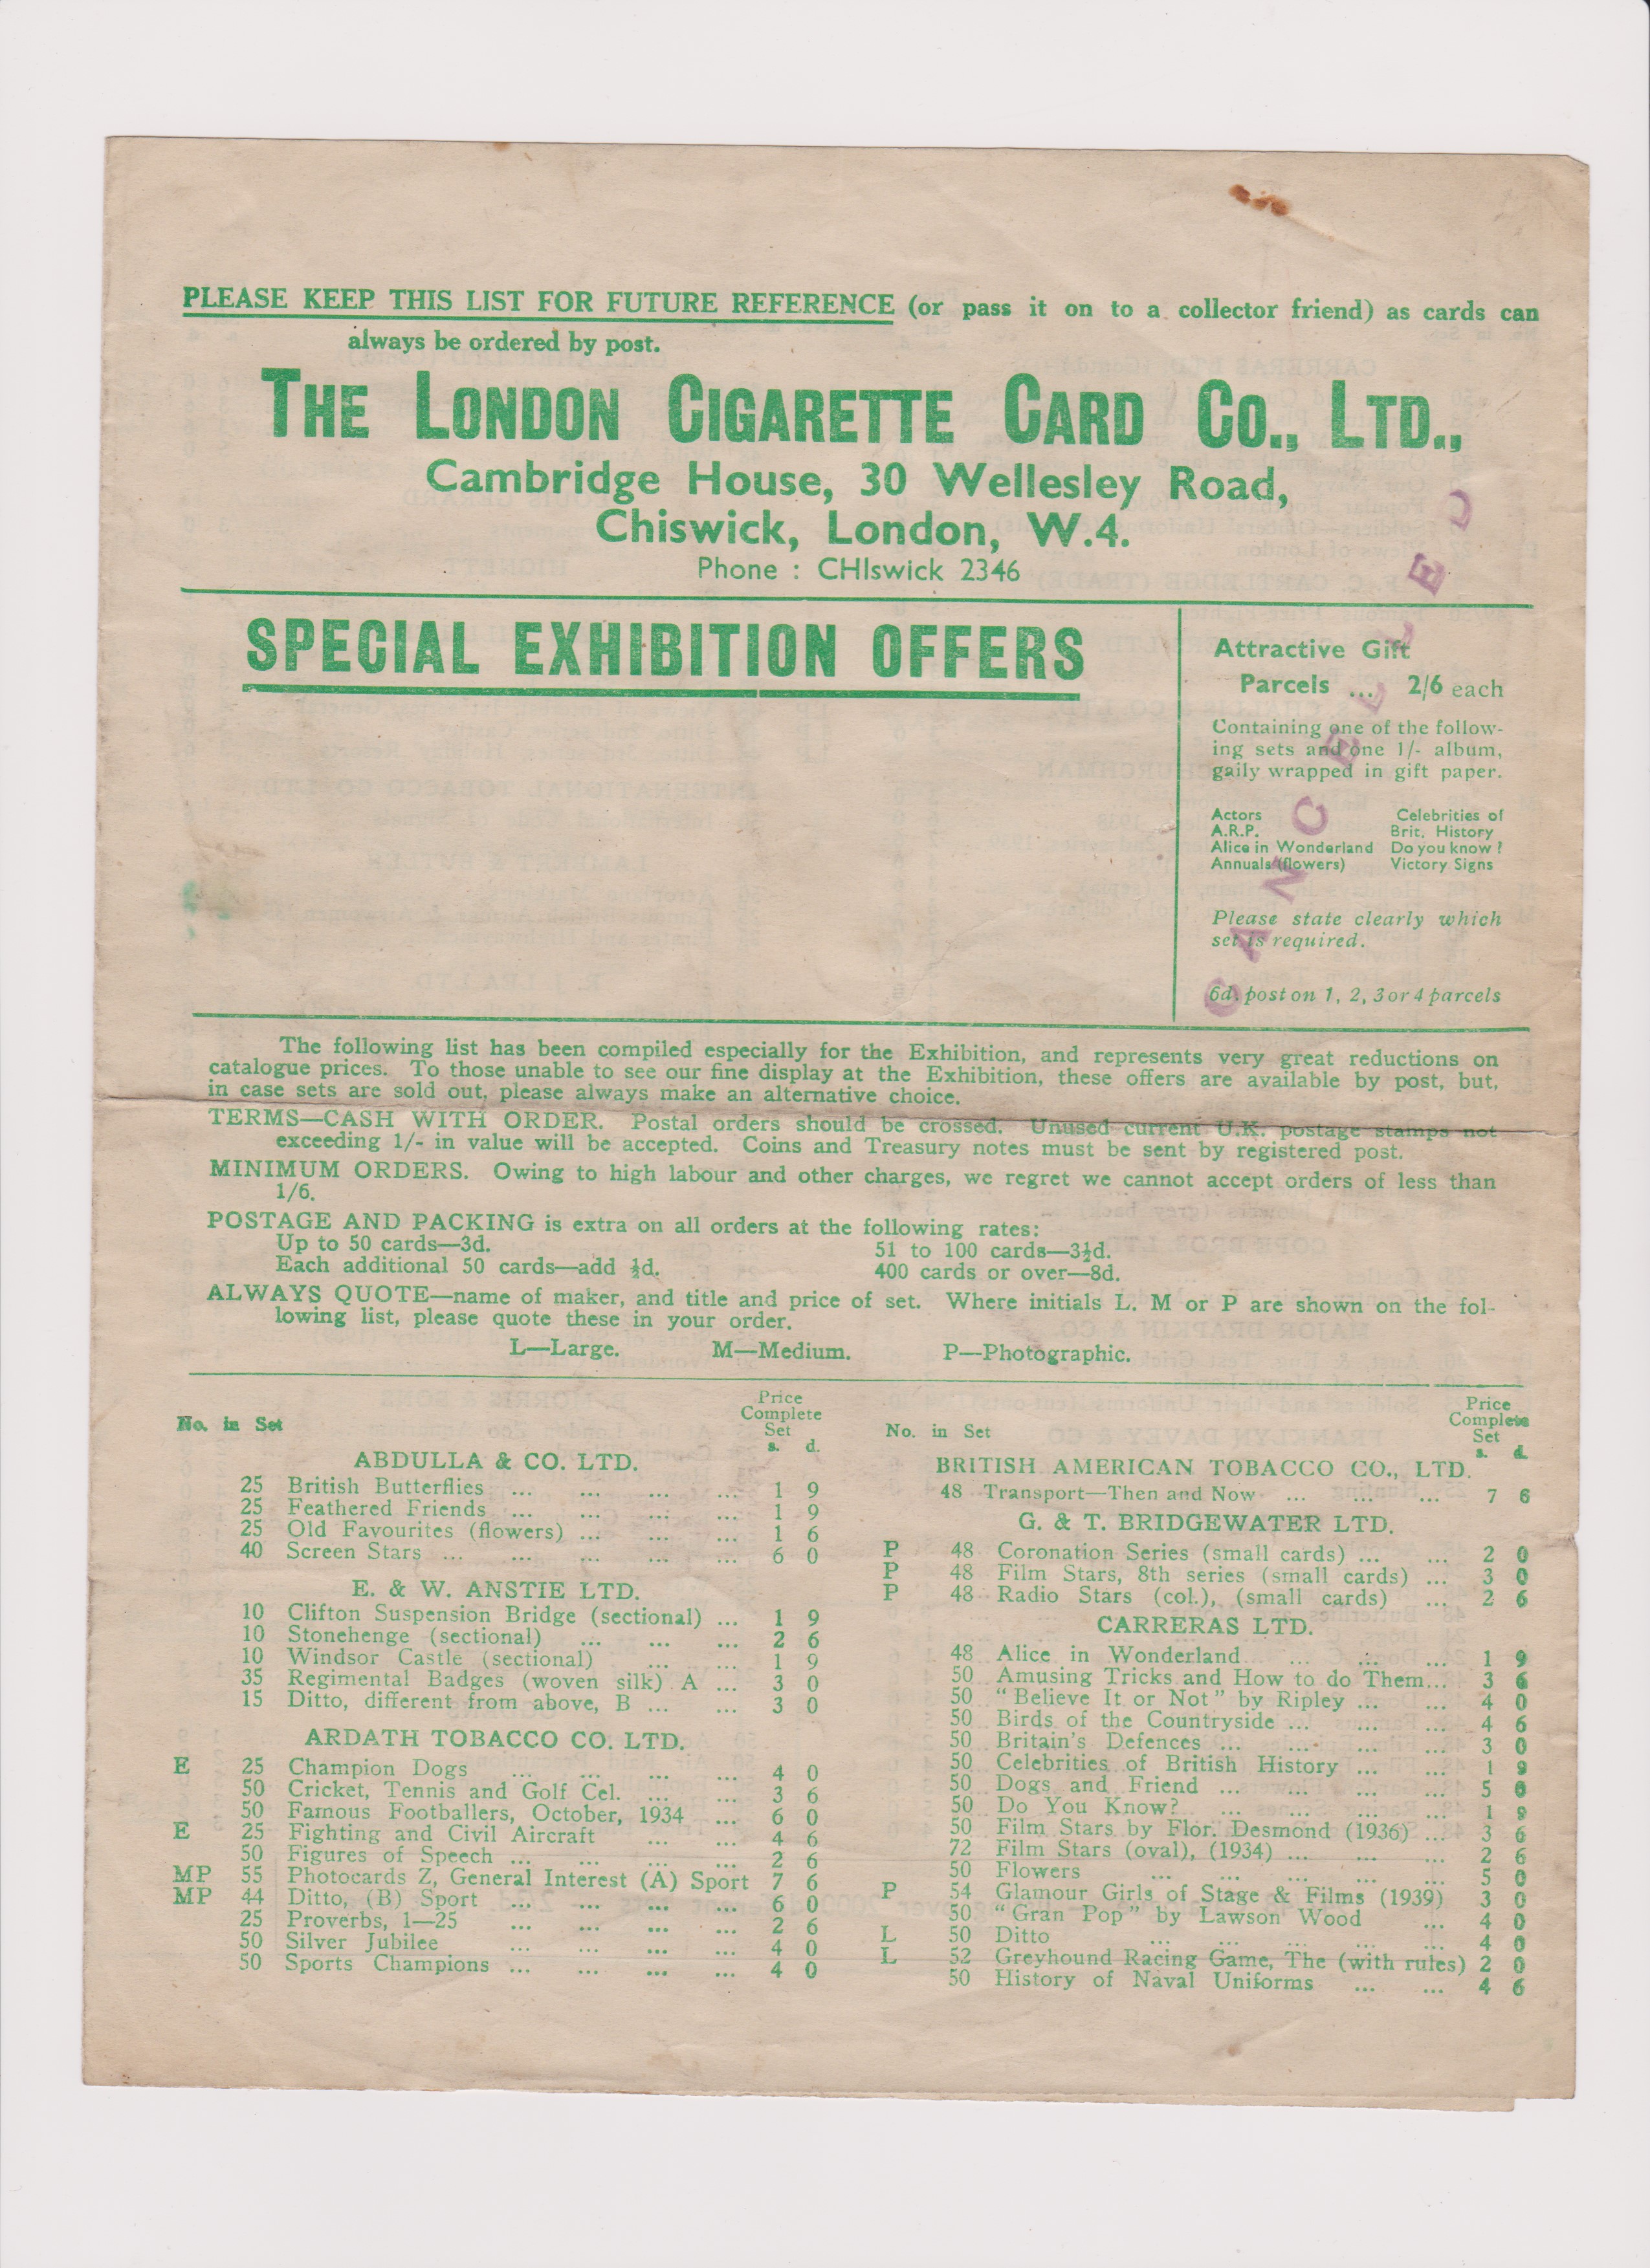 The London Cigarette Card Co, Ltd., Pamphlet for Special Exhibition Offers for the 1947/48 Price